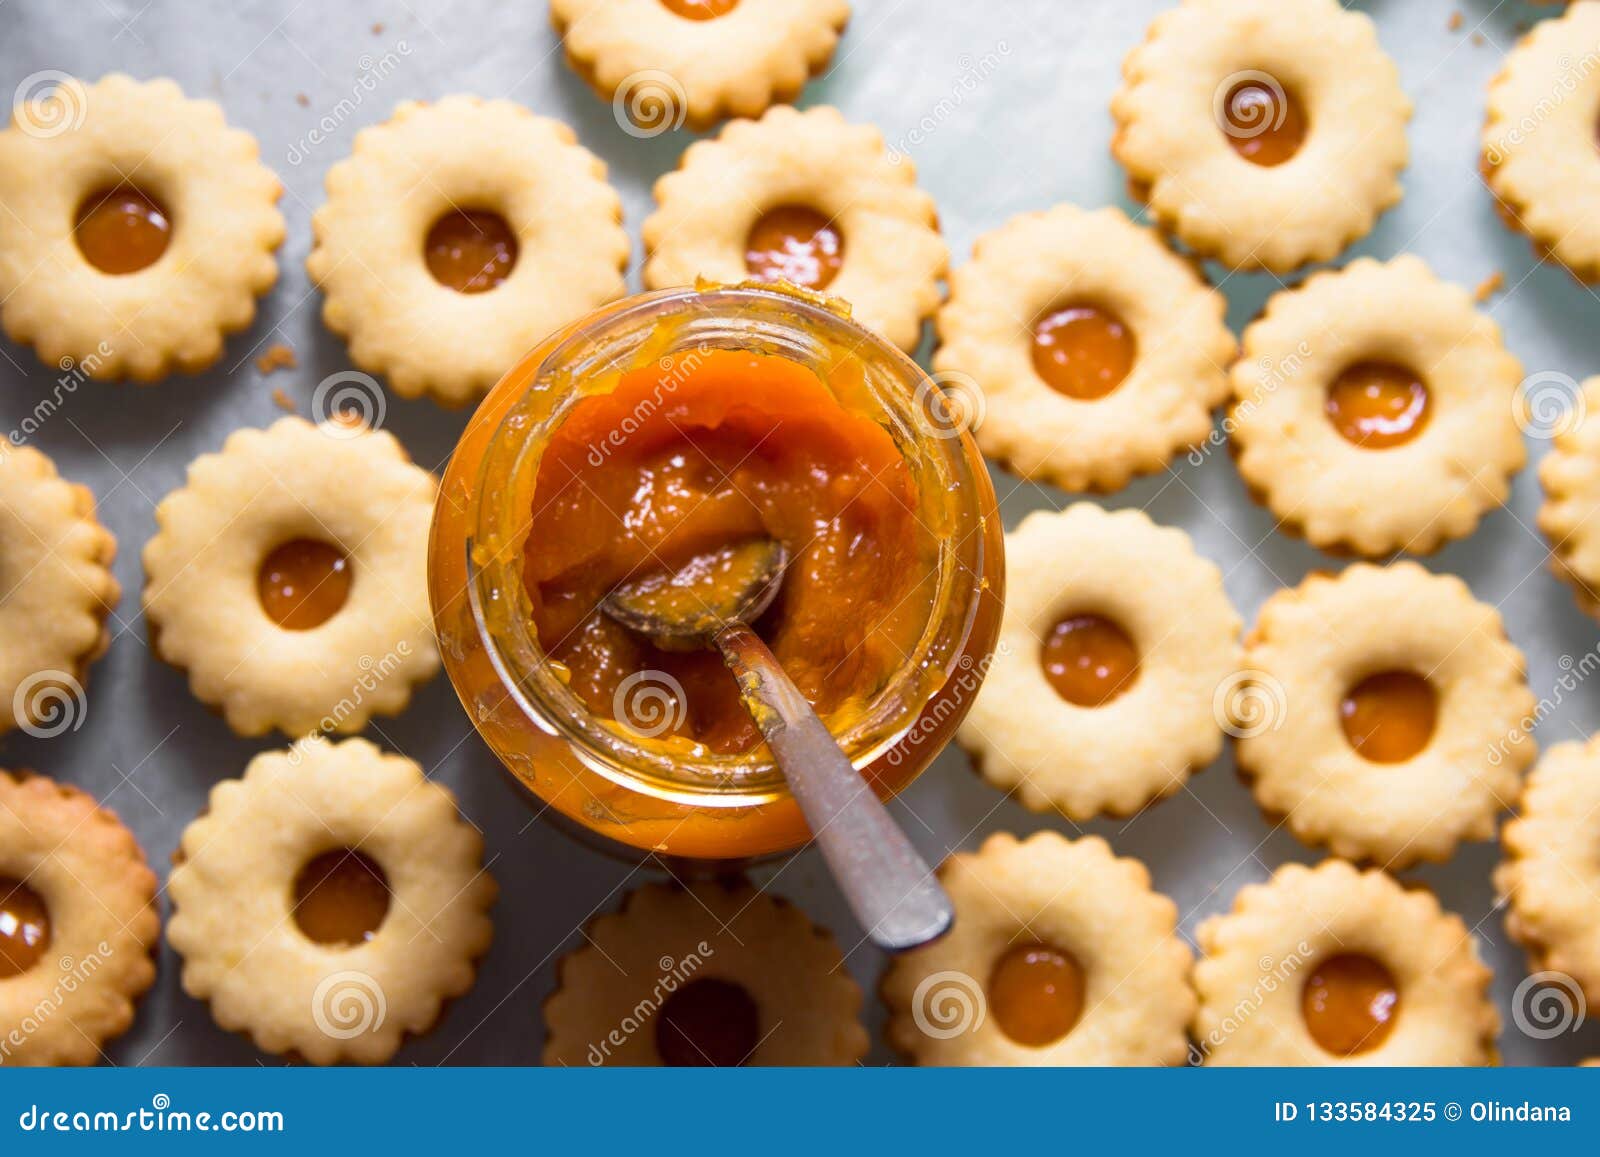 Traditional Austrian Home Baked Christmas Cookies Linzer Eyes With Apricot Jam On Baking Tray With Glass Jar And Spoon Stock Image Image Of Decoration Apricot 133584325